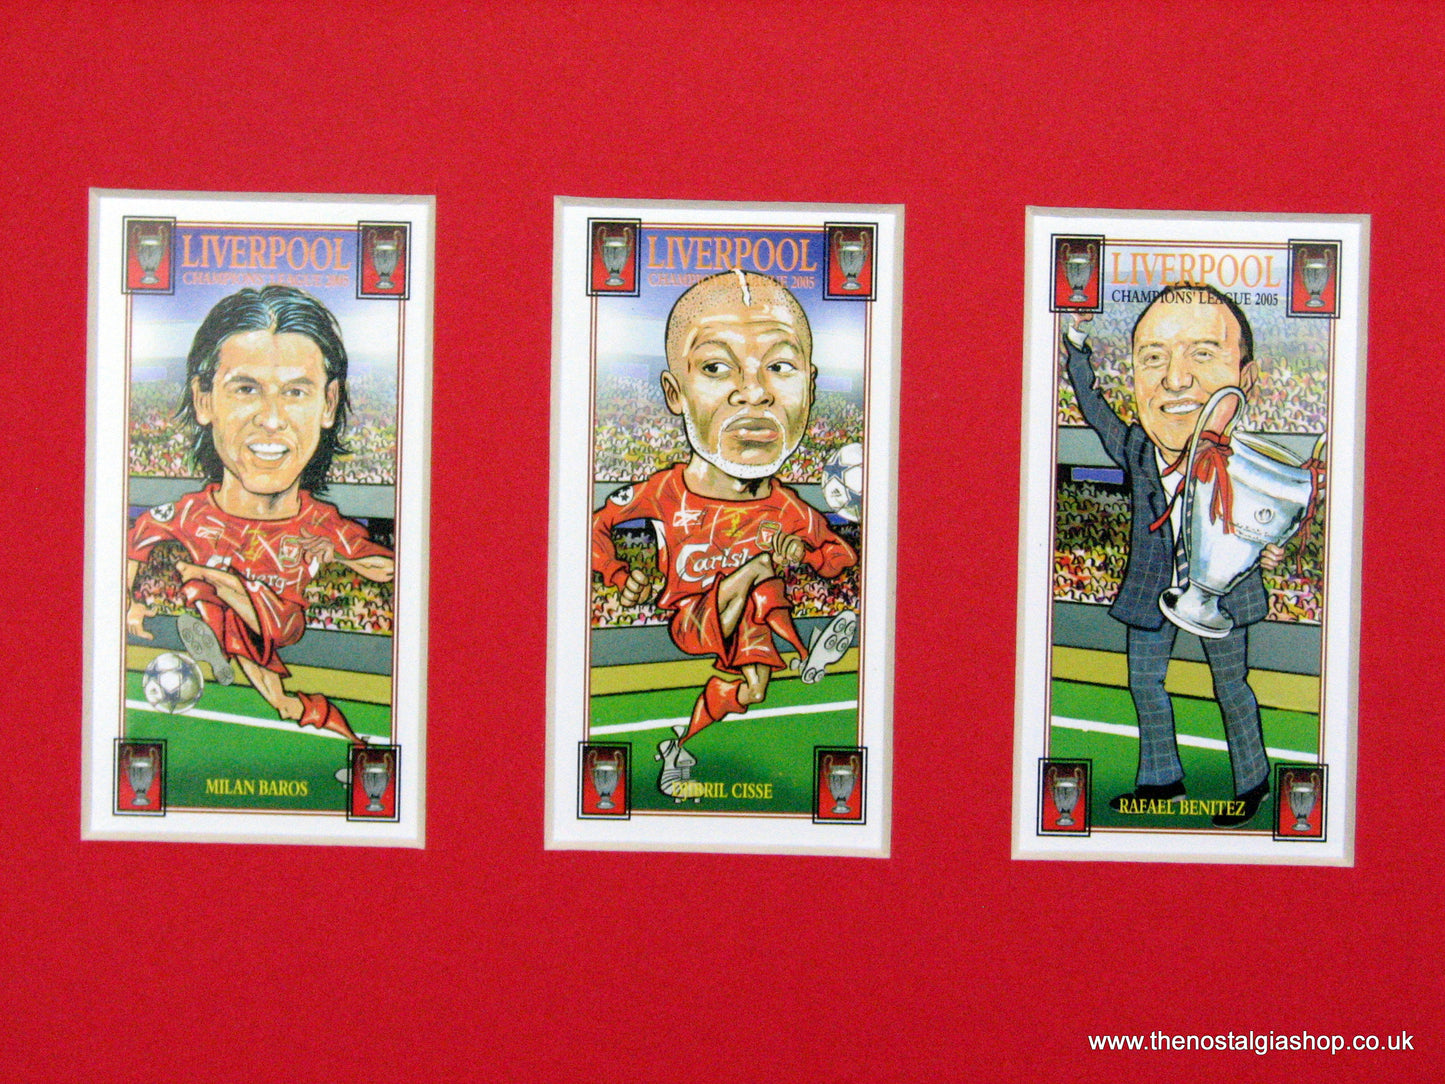 Liverpool Champions League 2005. Mounted Football Card Set.